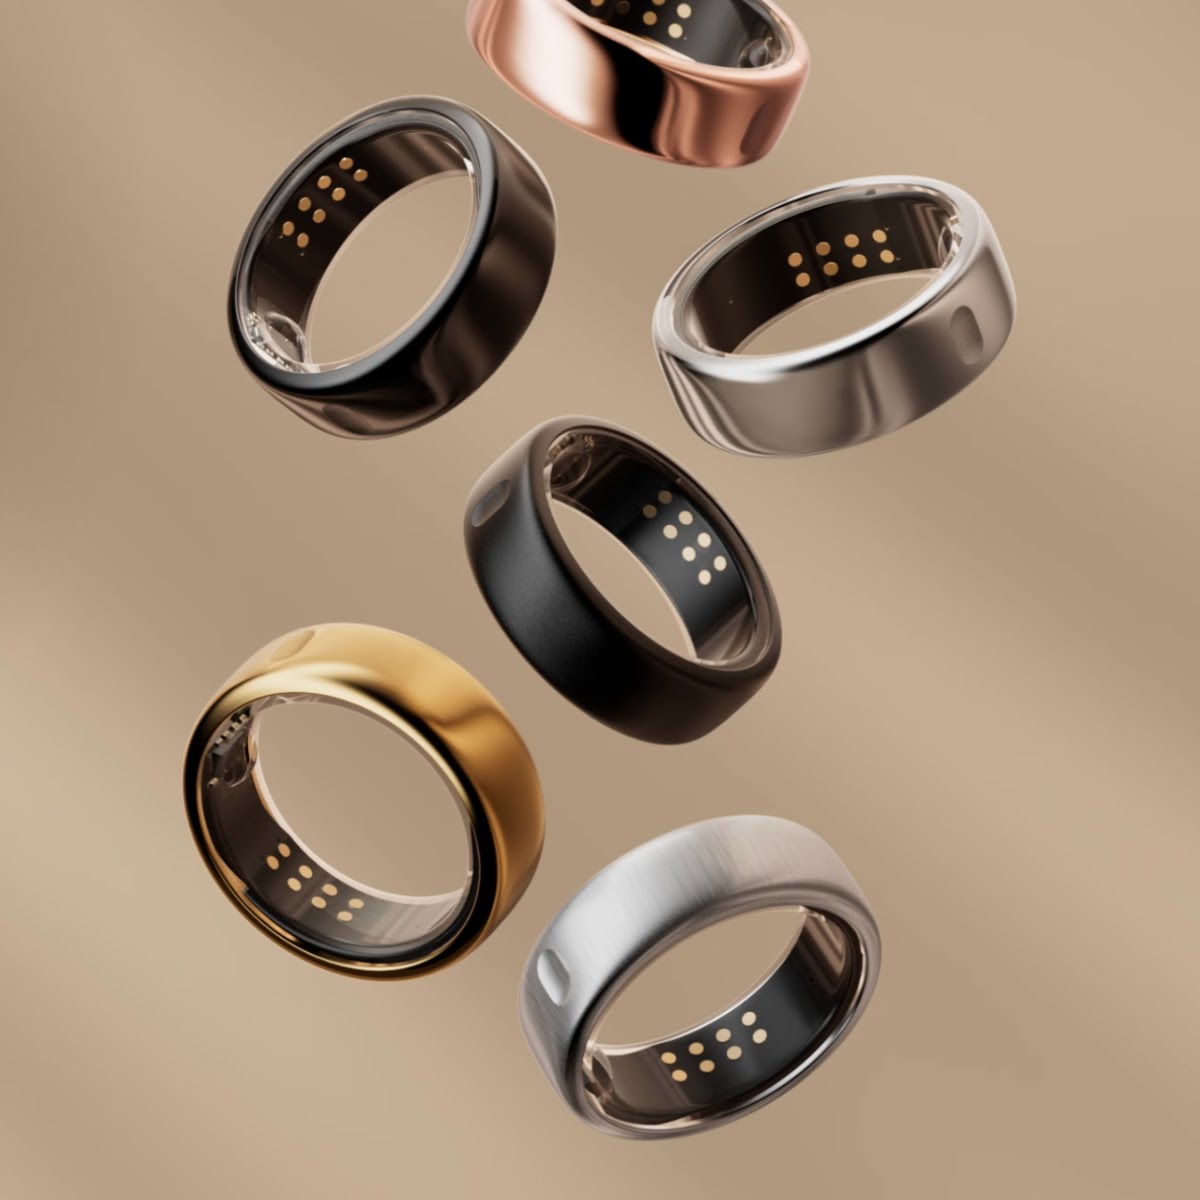 Oura Ring, from €329